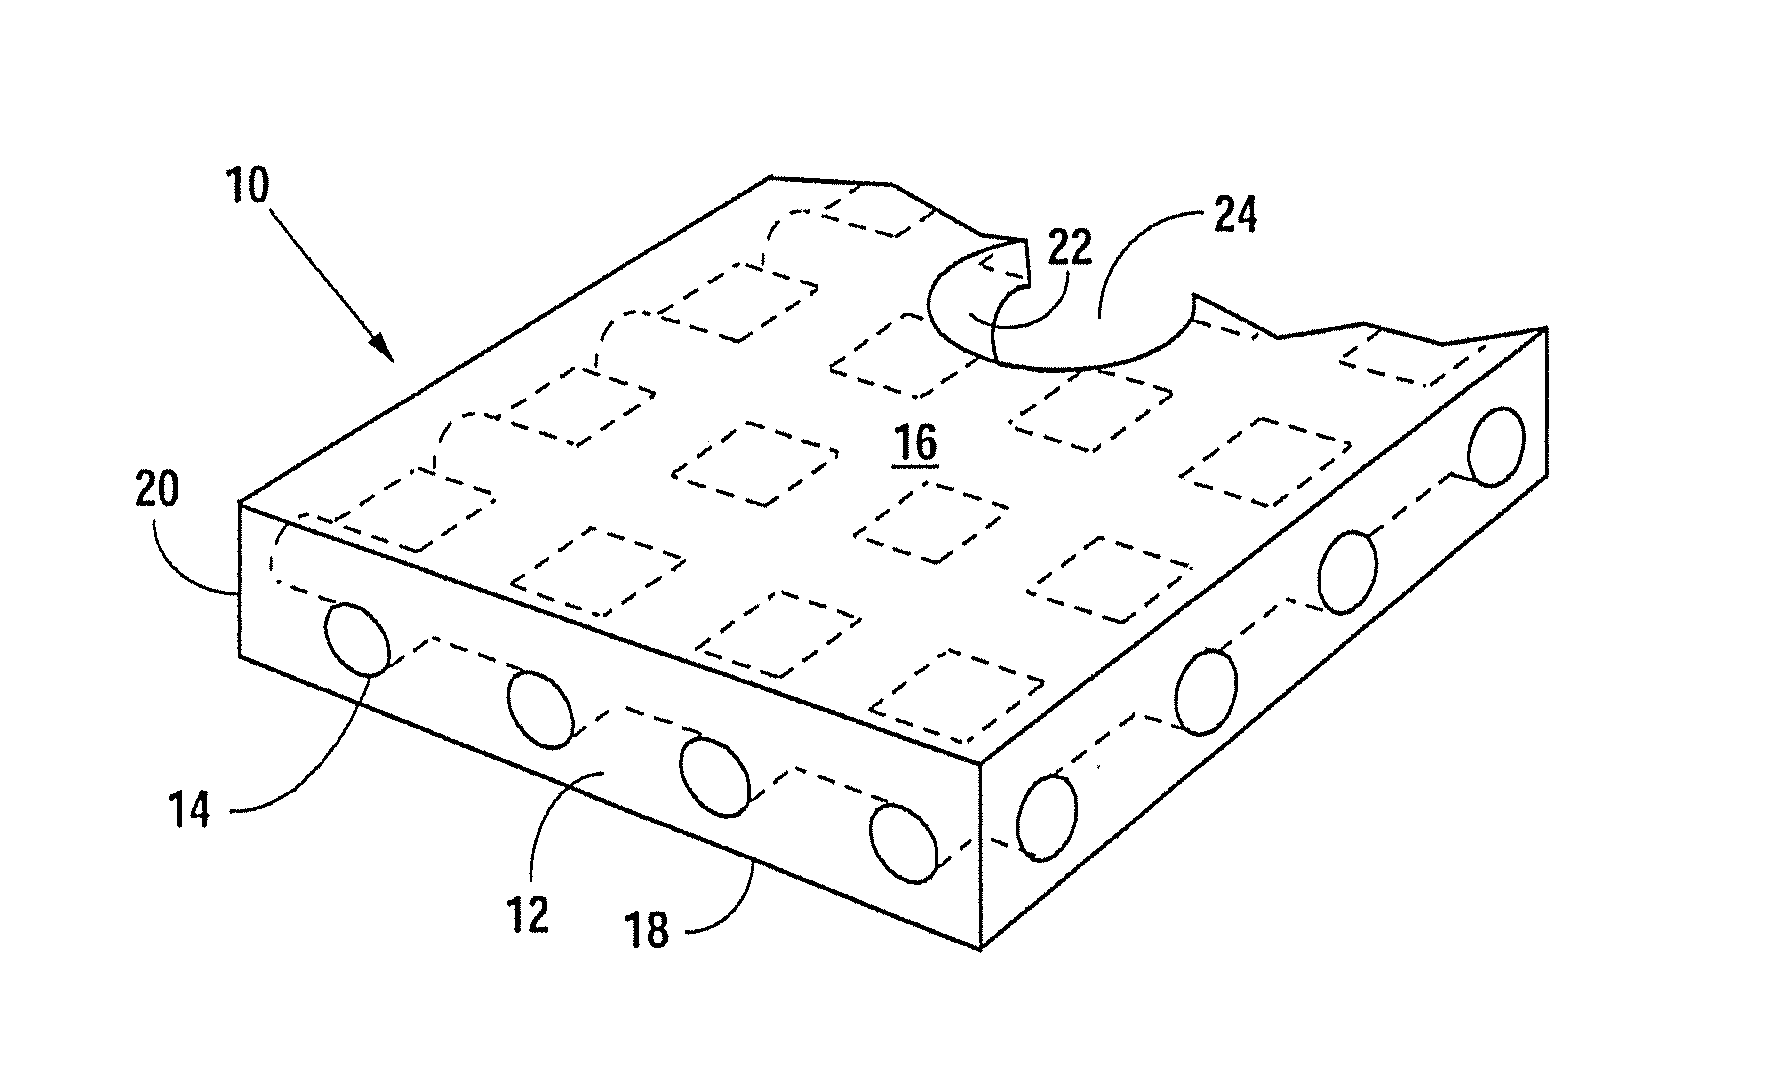 Elastomeric gel body gasket having a substantially incompressible skeleton, a method of making and using the same